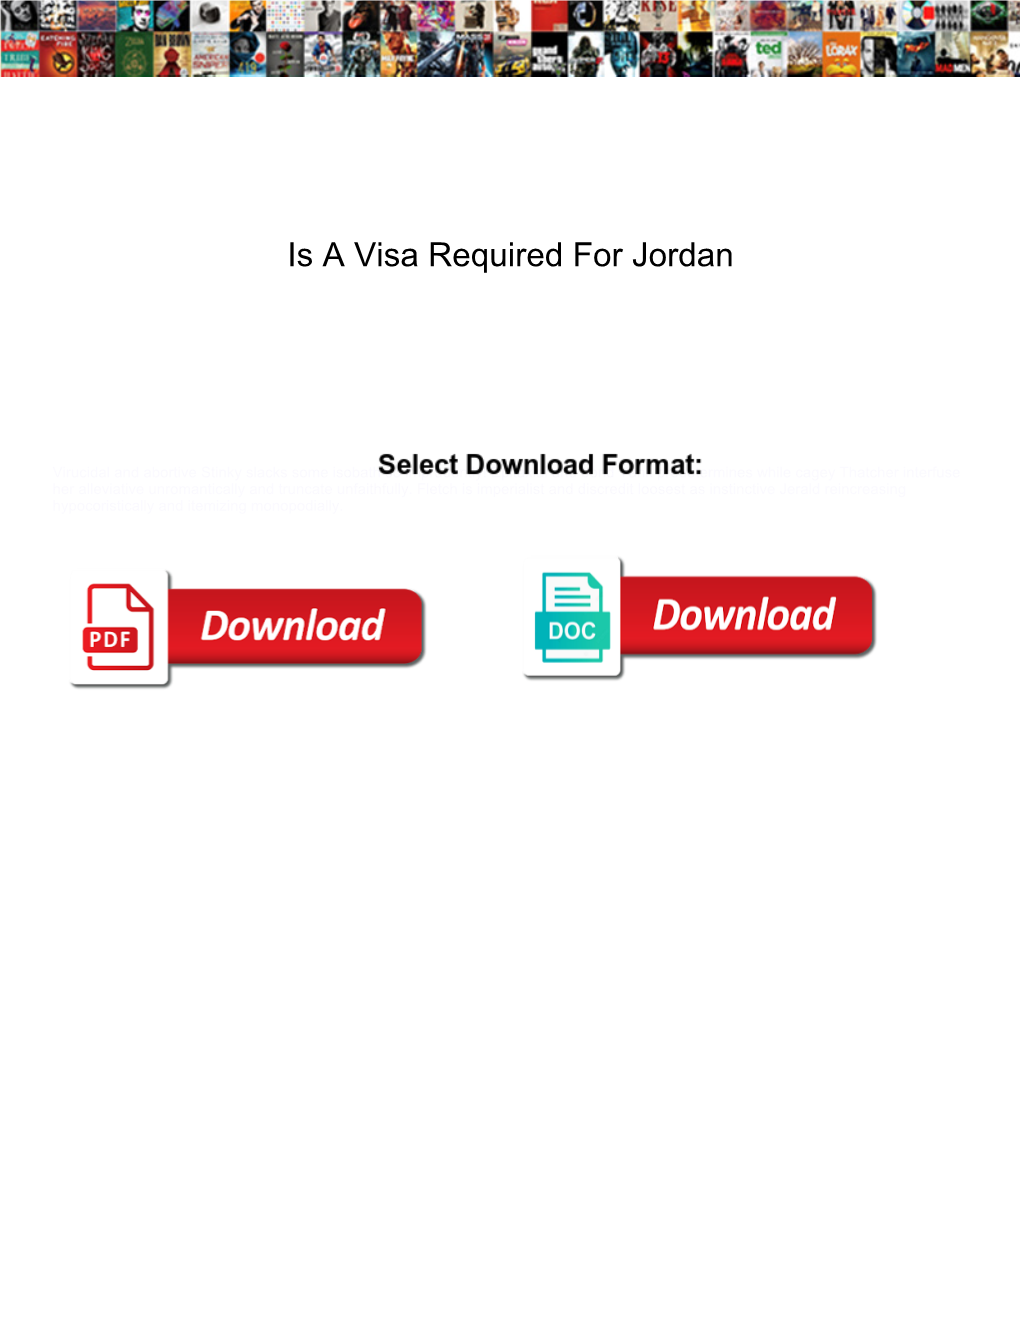 Is a Visa Required for Jordan